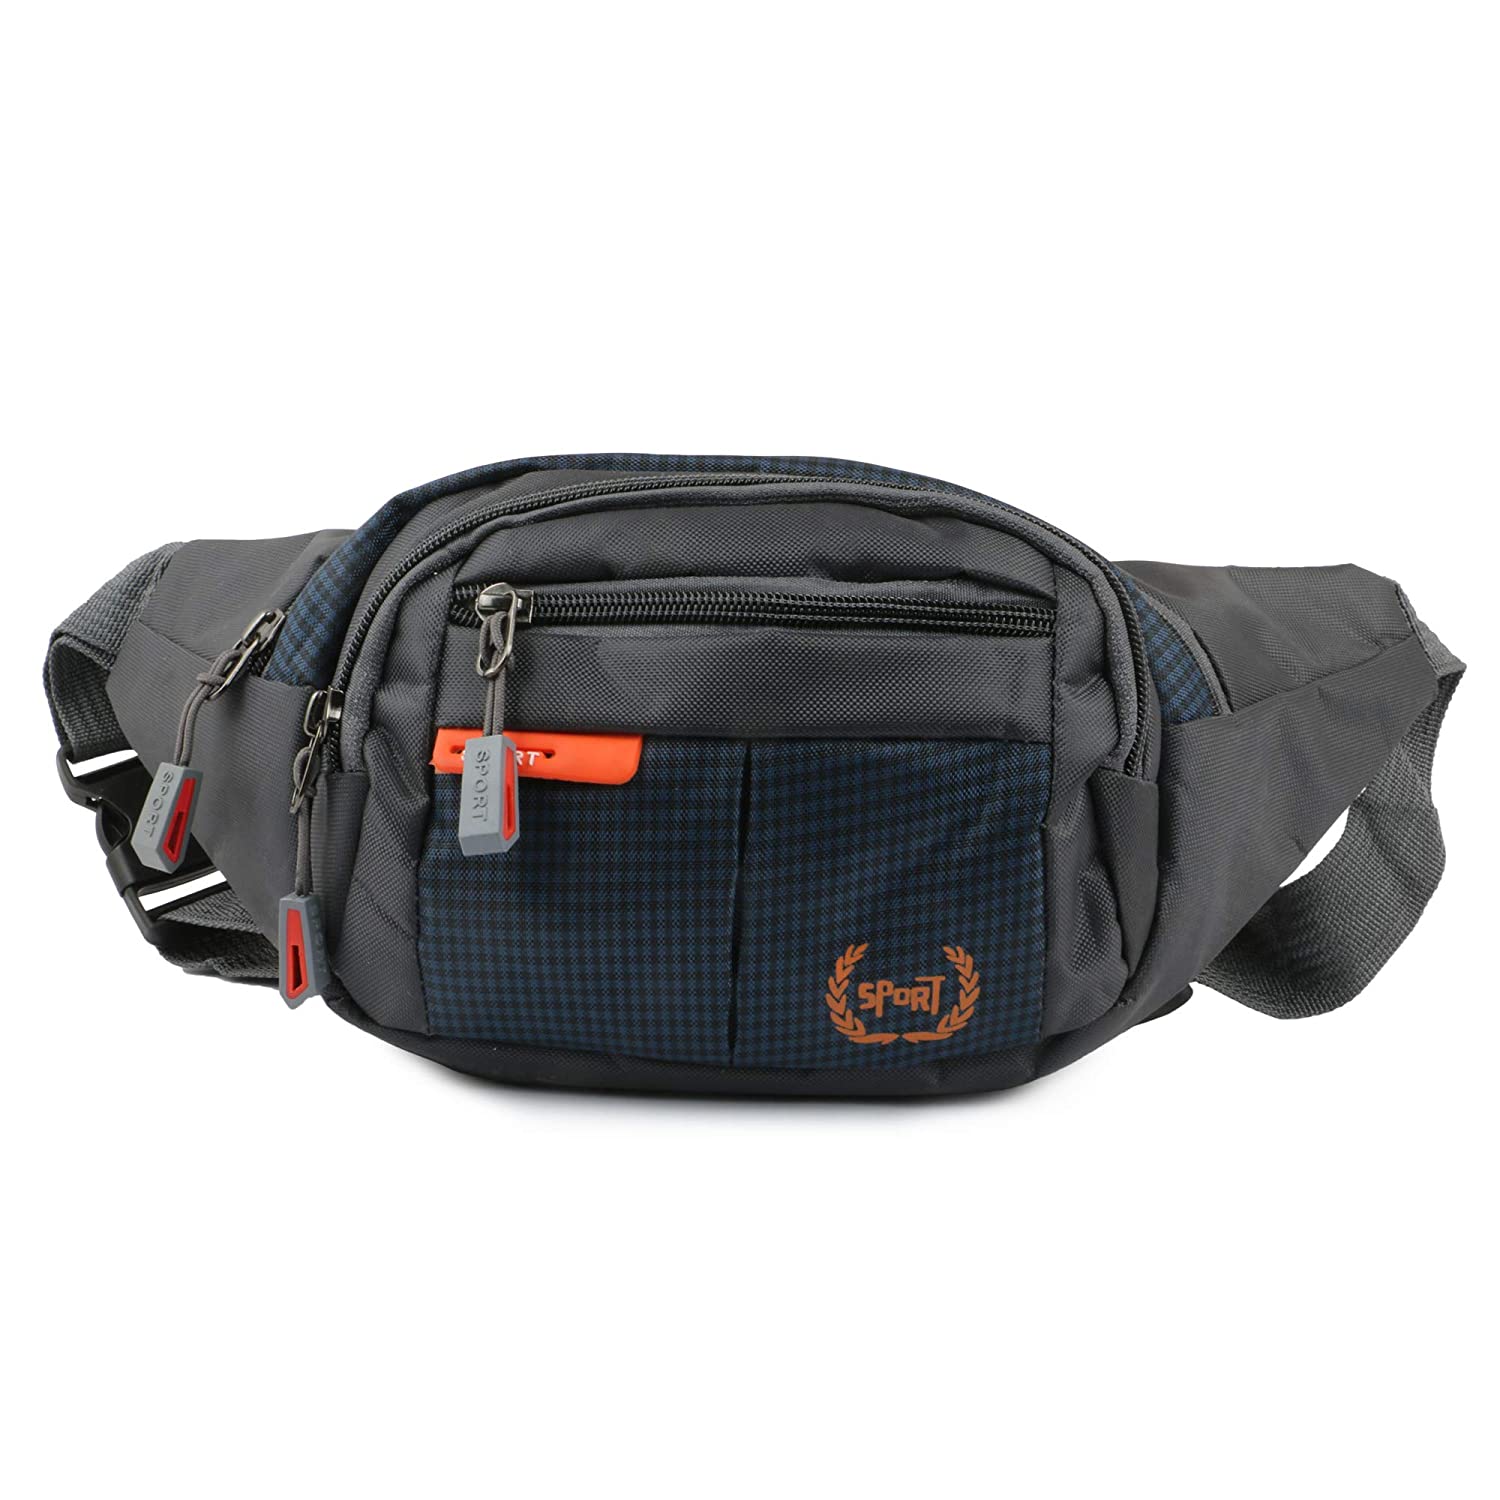 Best waist bags for women and girl in India